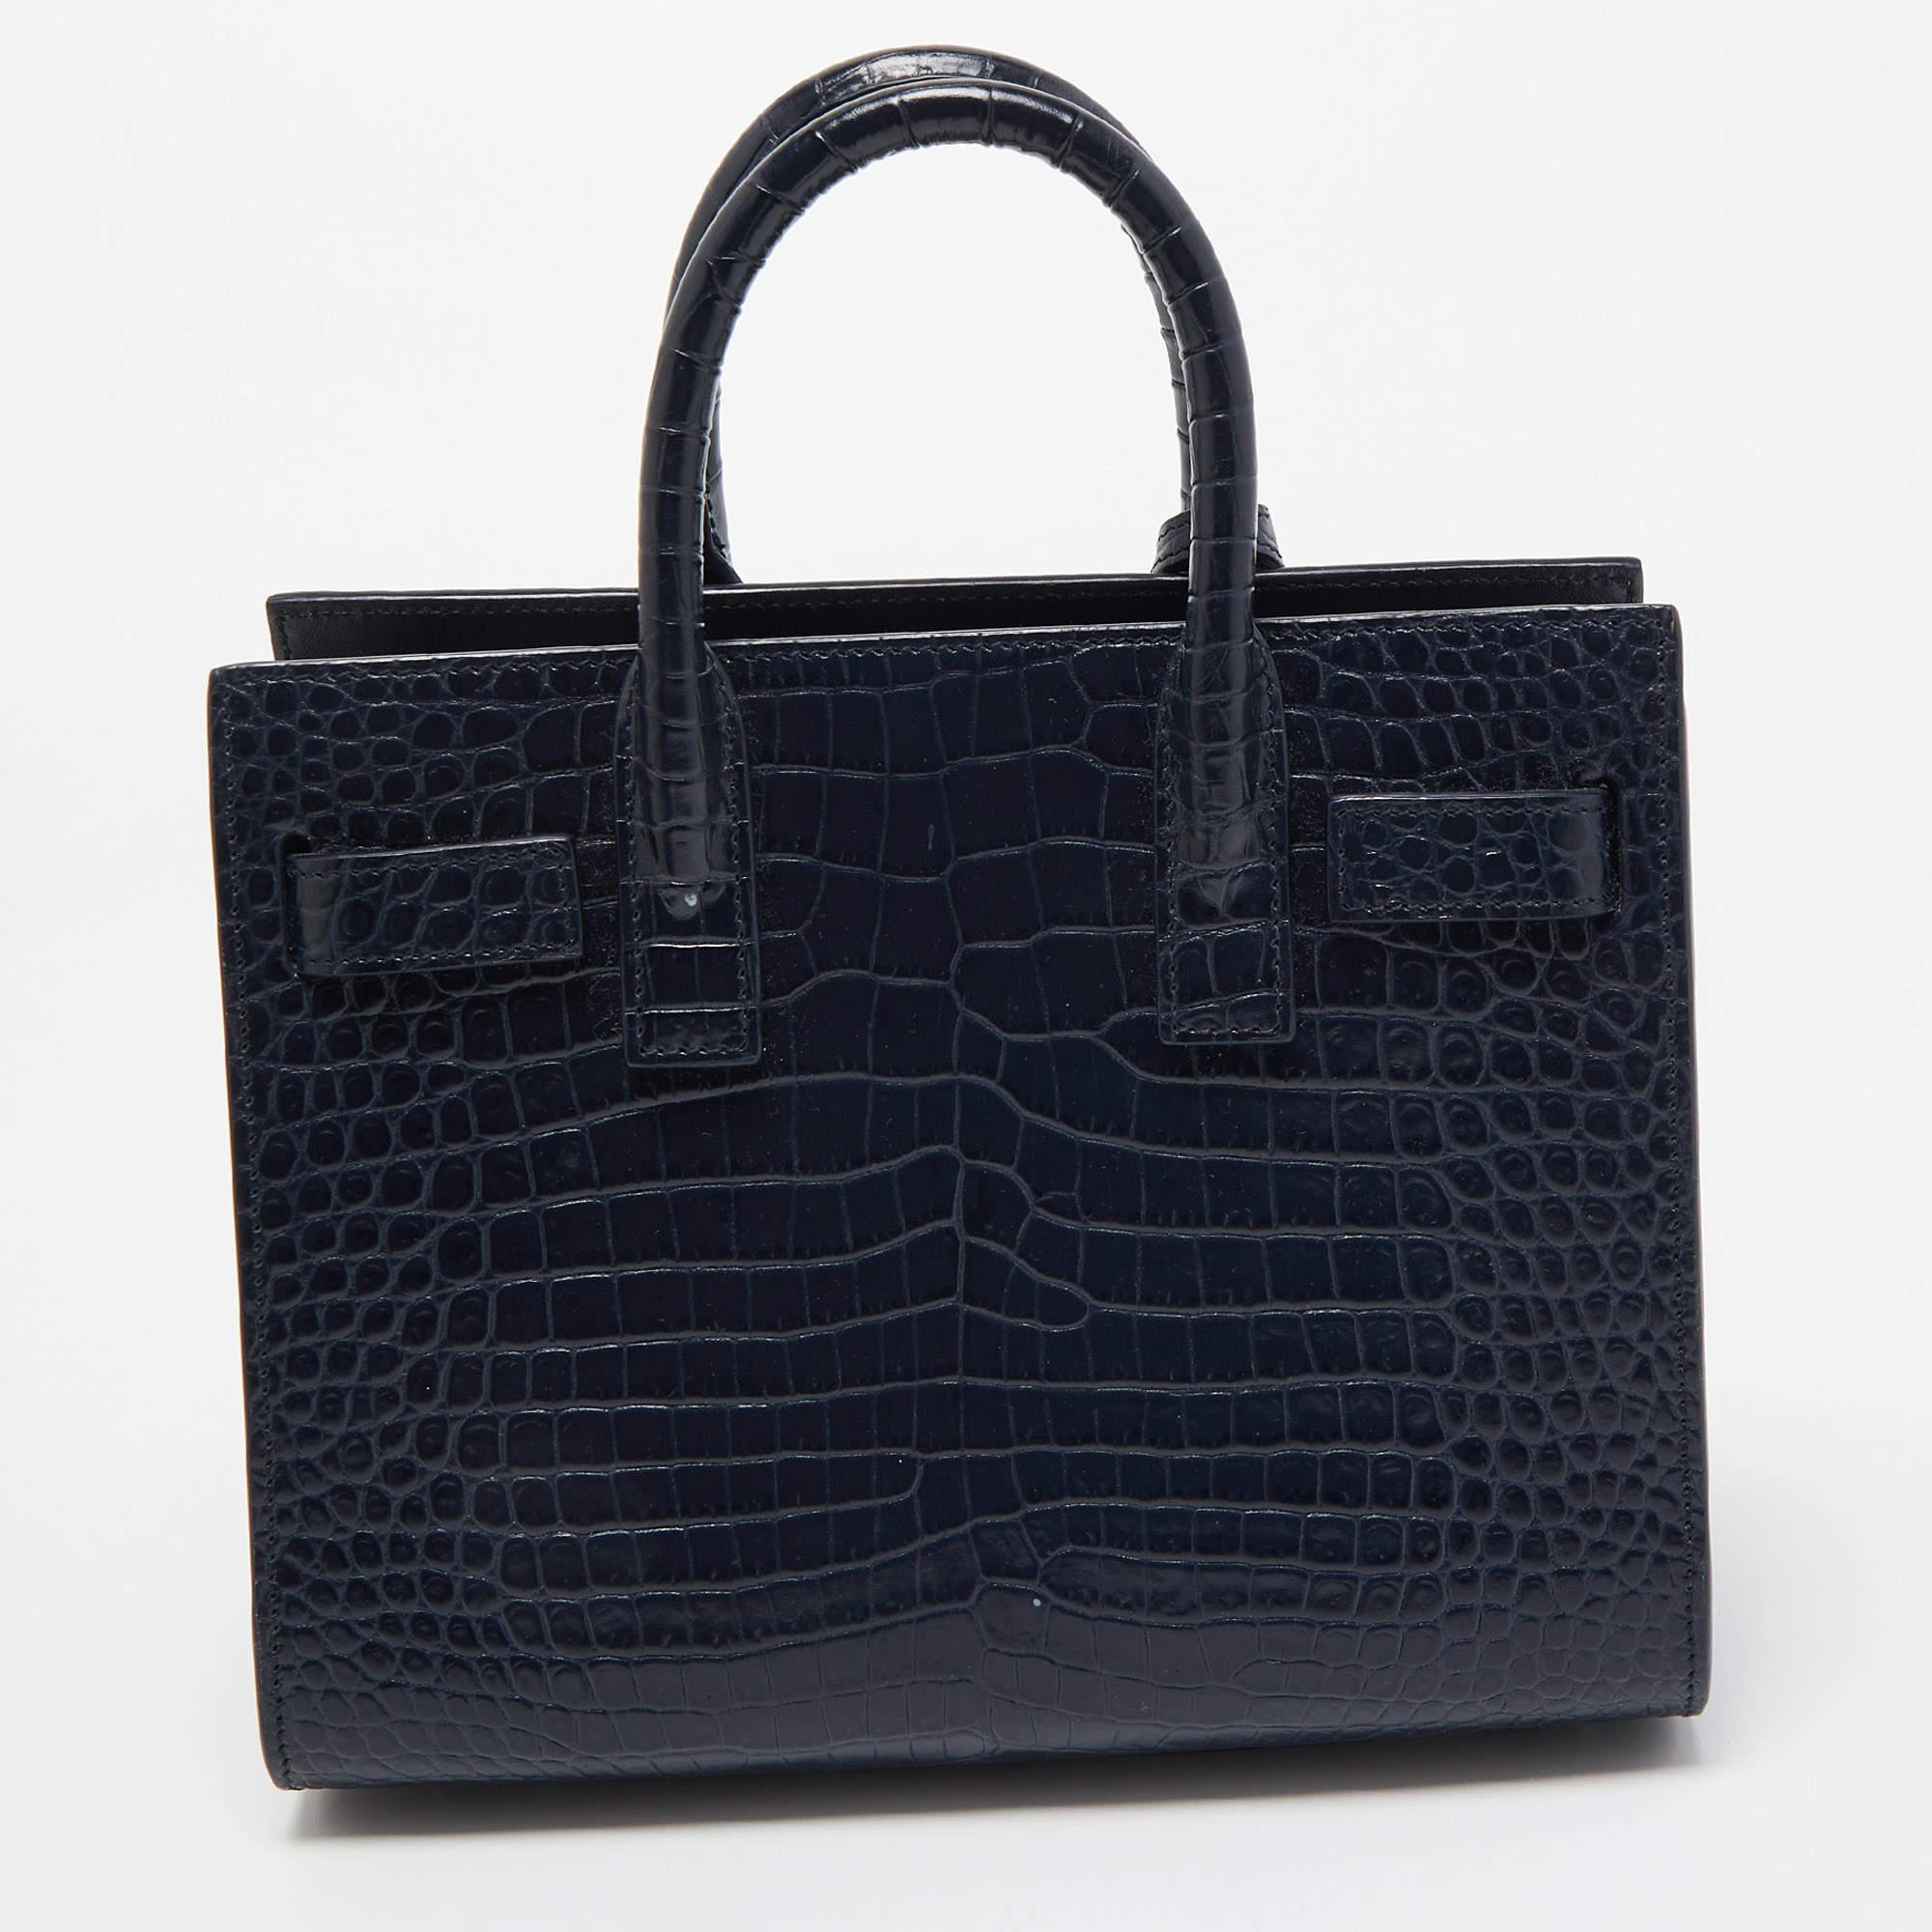 This YSL tote is a result of blending high crafting skills with a practical design. It arrives with a durable exterior completed by luxe detailing. It is an accessory that you can count on.

Includes: Padlock and Key, Detachable Strap